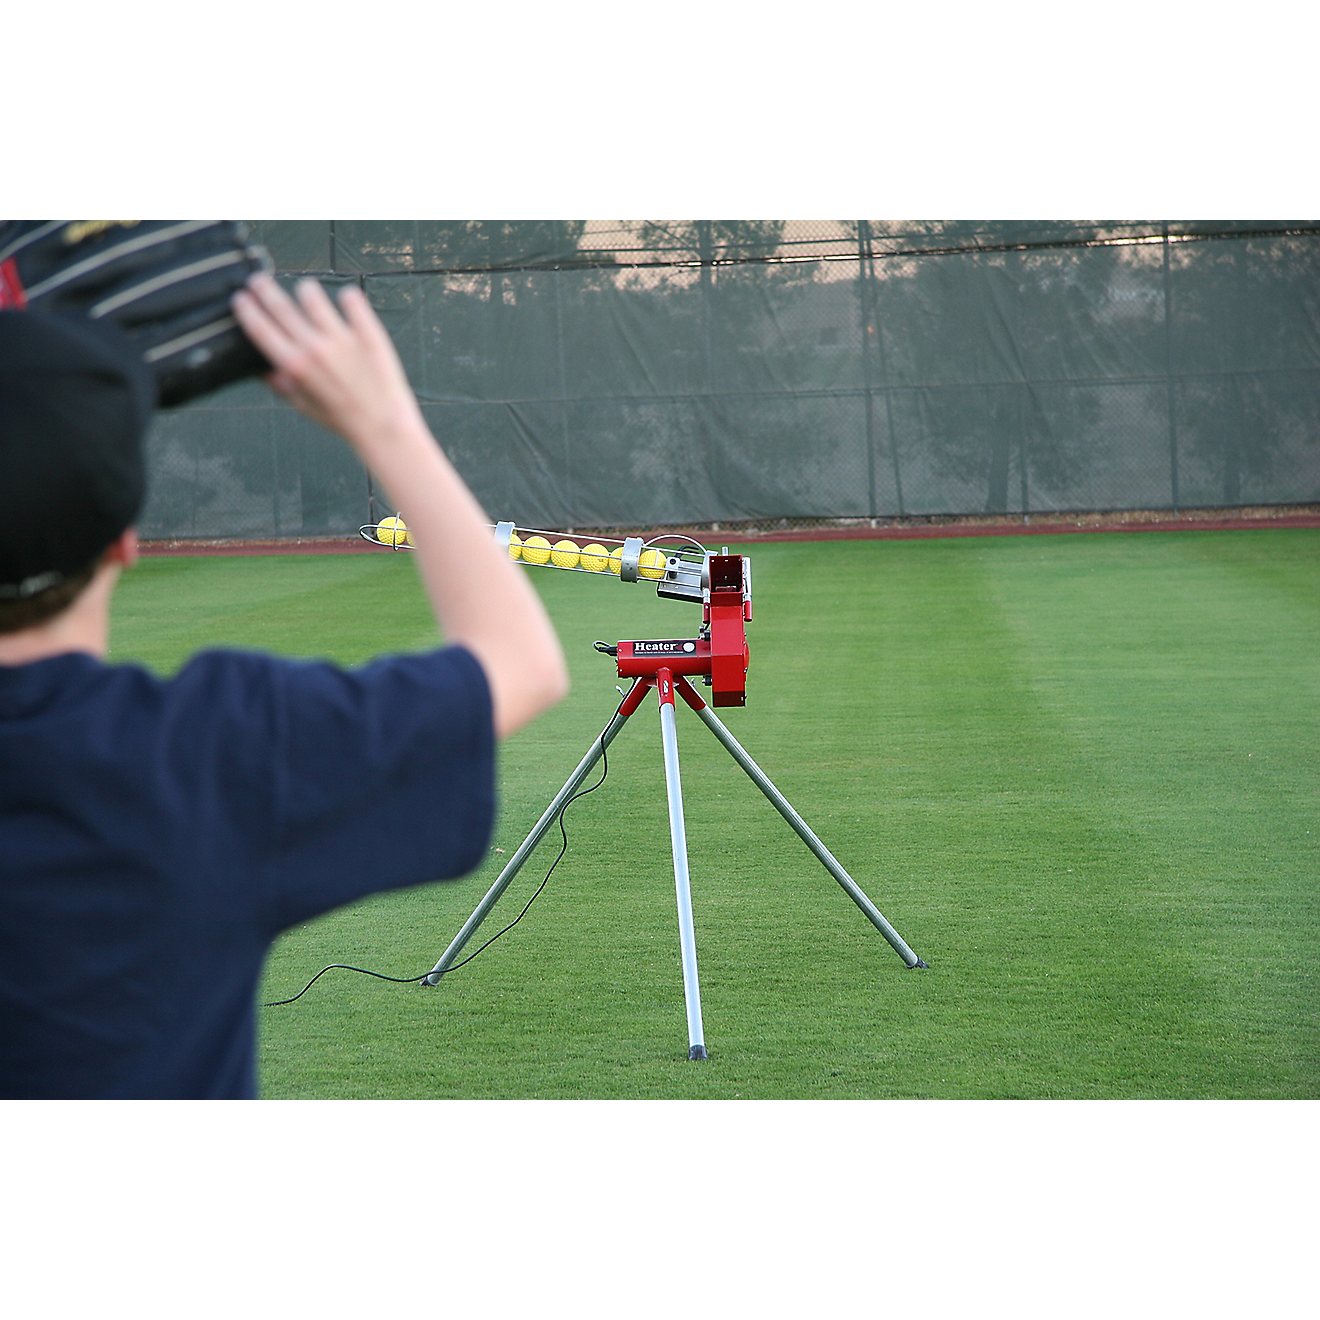 Trend Sports Heater Real Baseball Pitching Machine with Auto Ball Feeder                                                         - view number 2